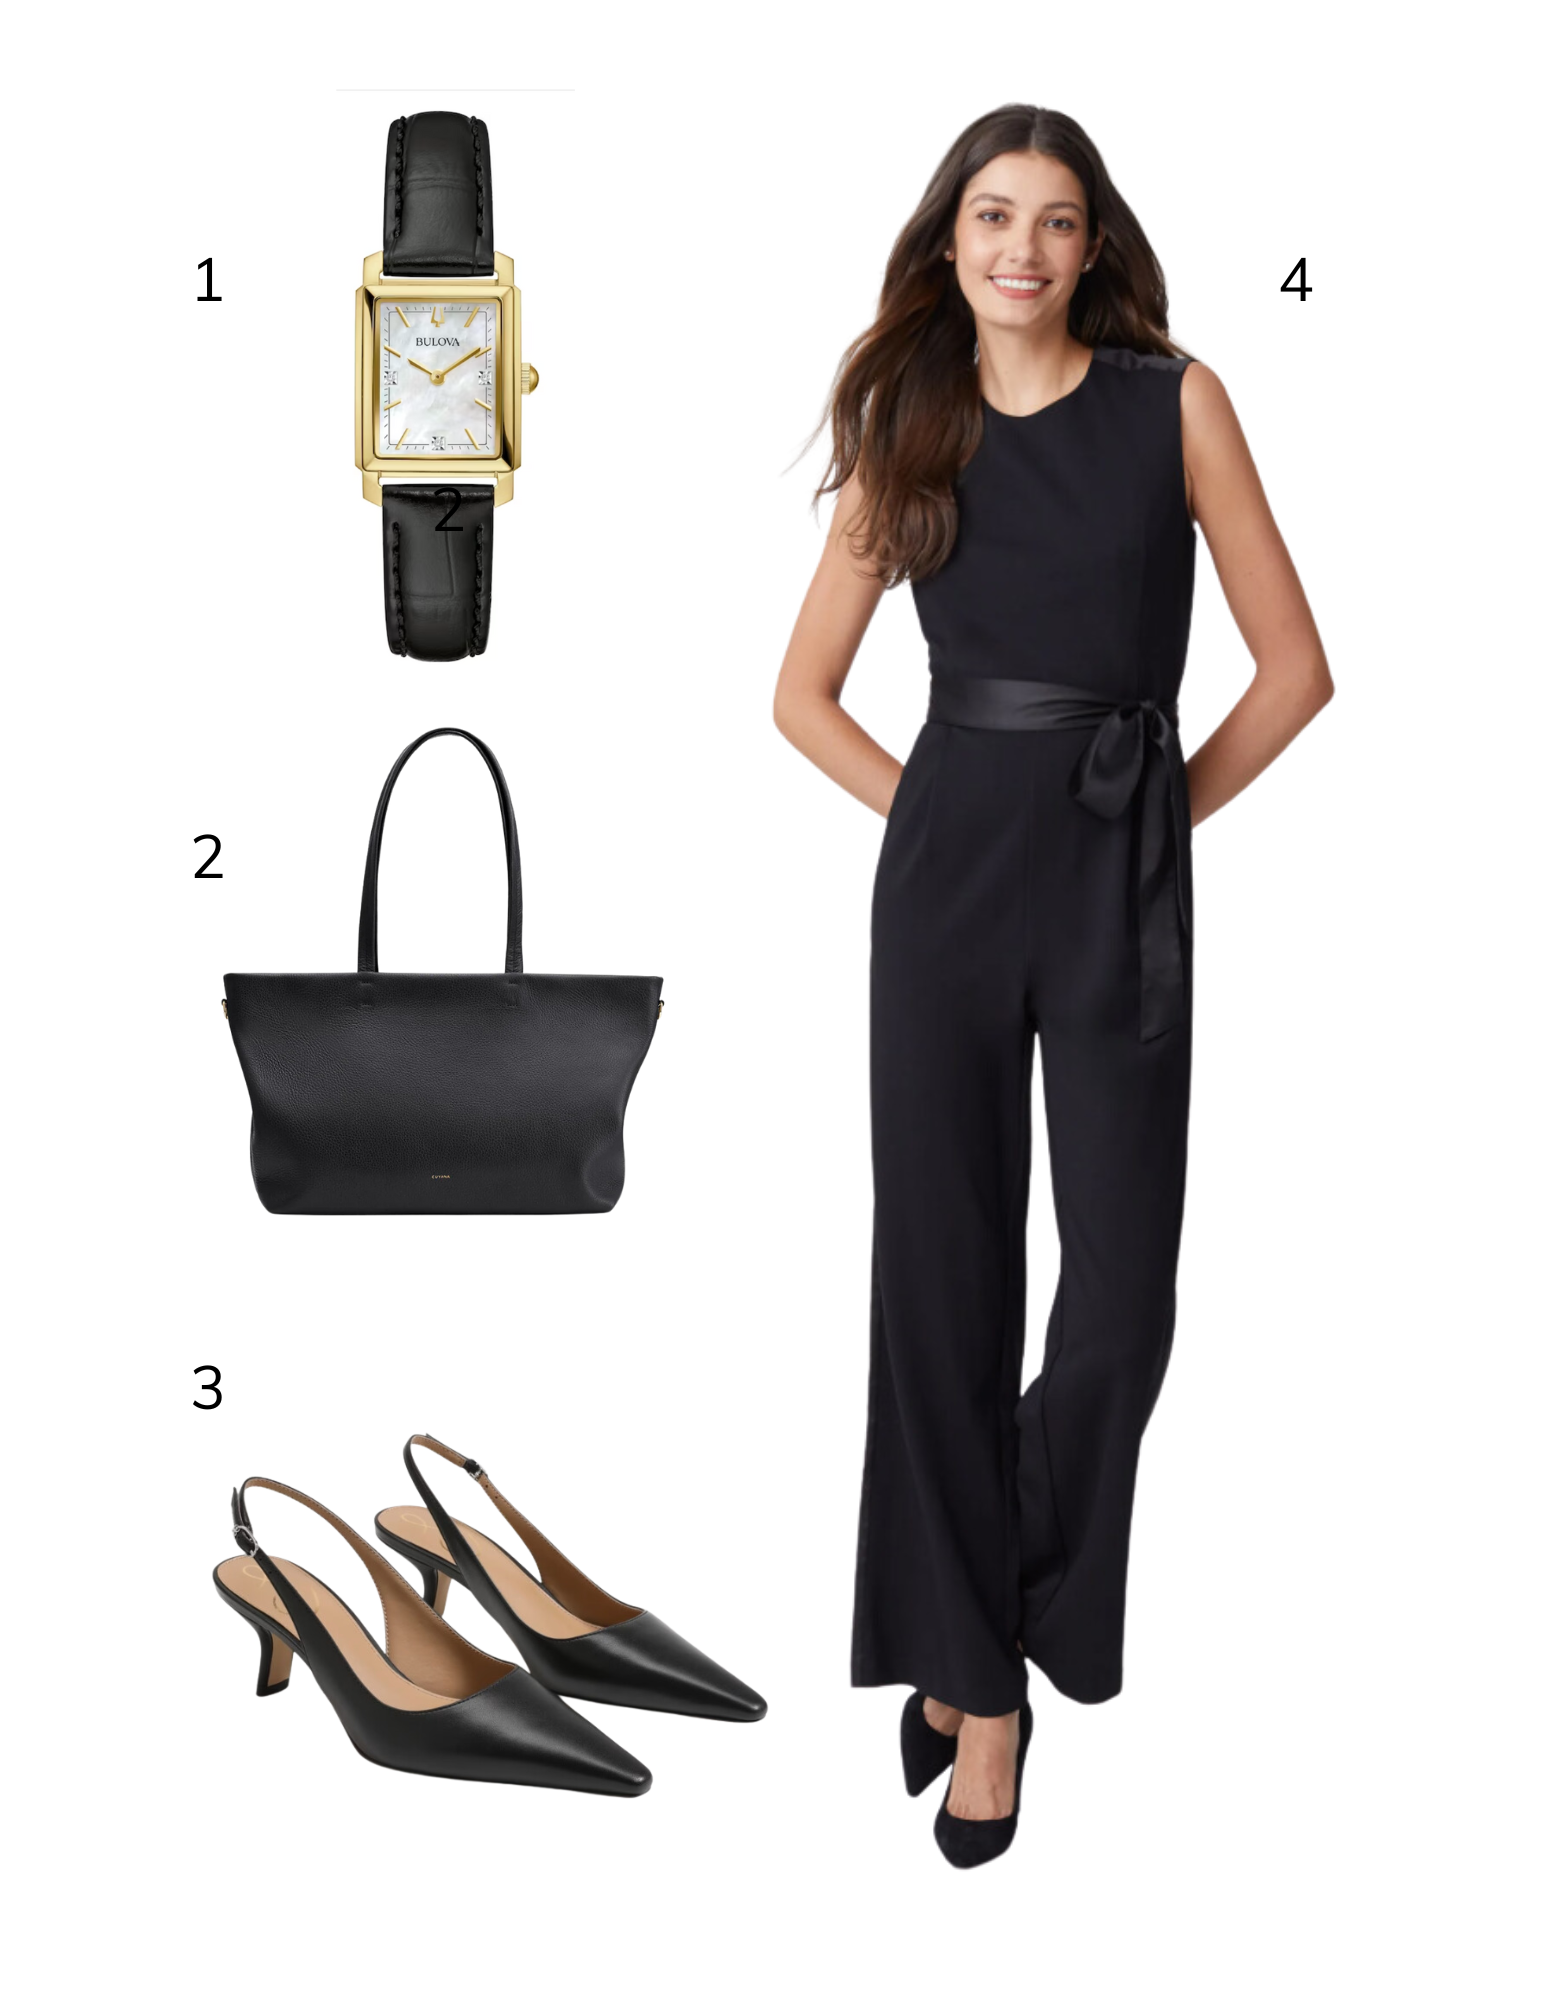 10 Trendy Business Casual Outfits to Wear to Work 